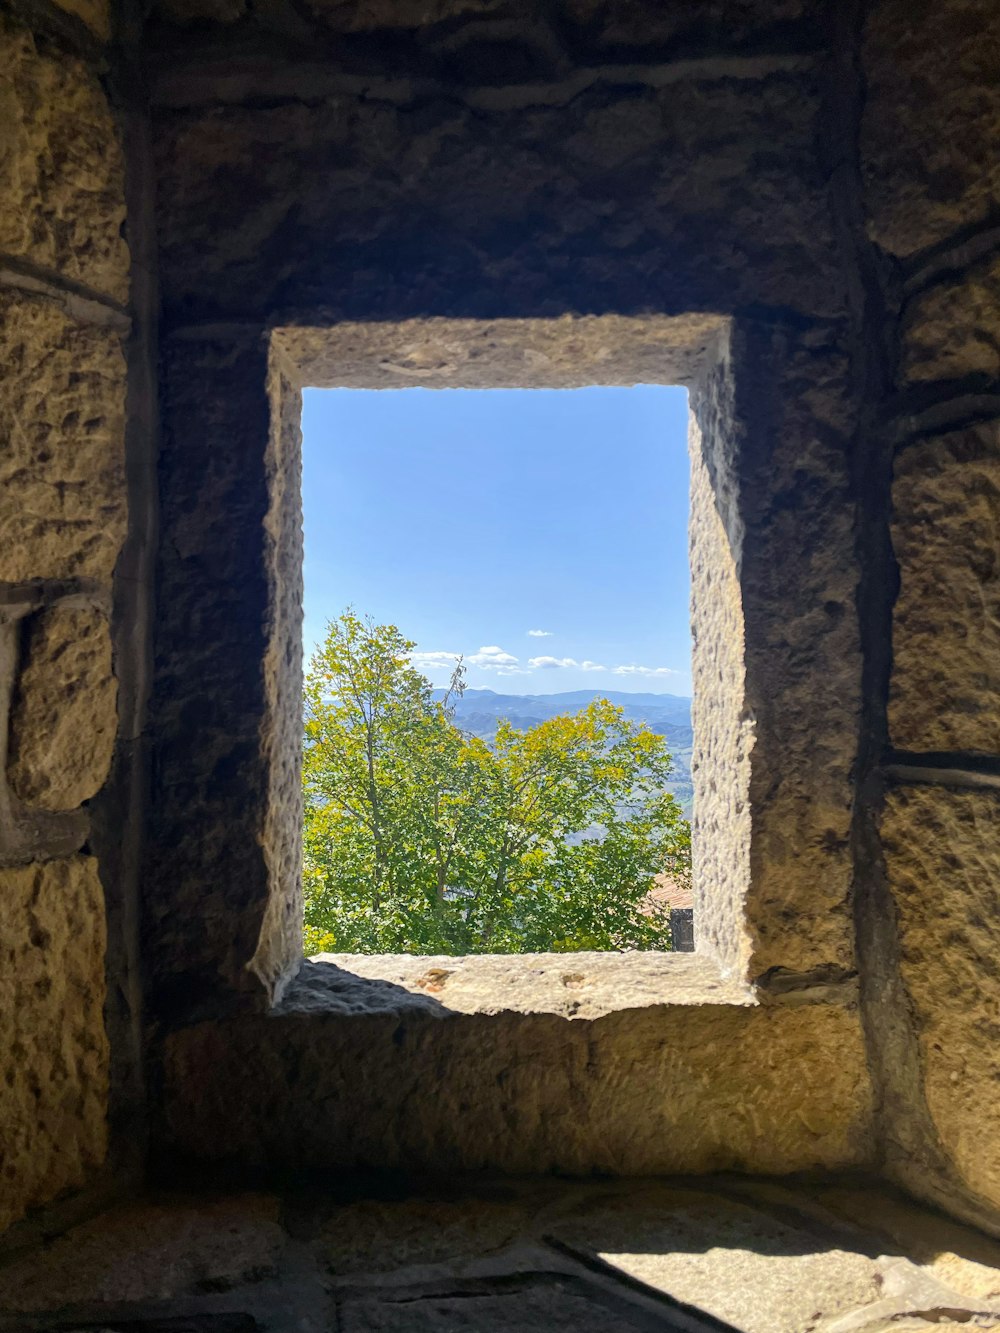 a window in a stone wall with a view of trees